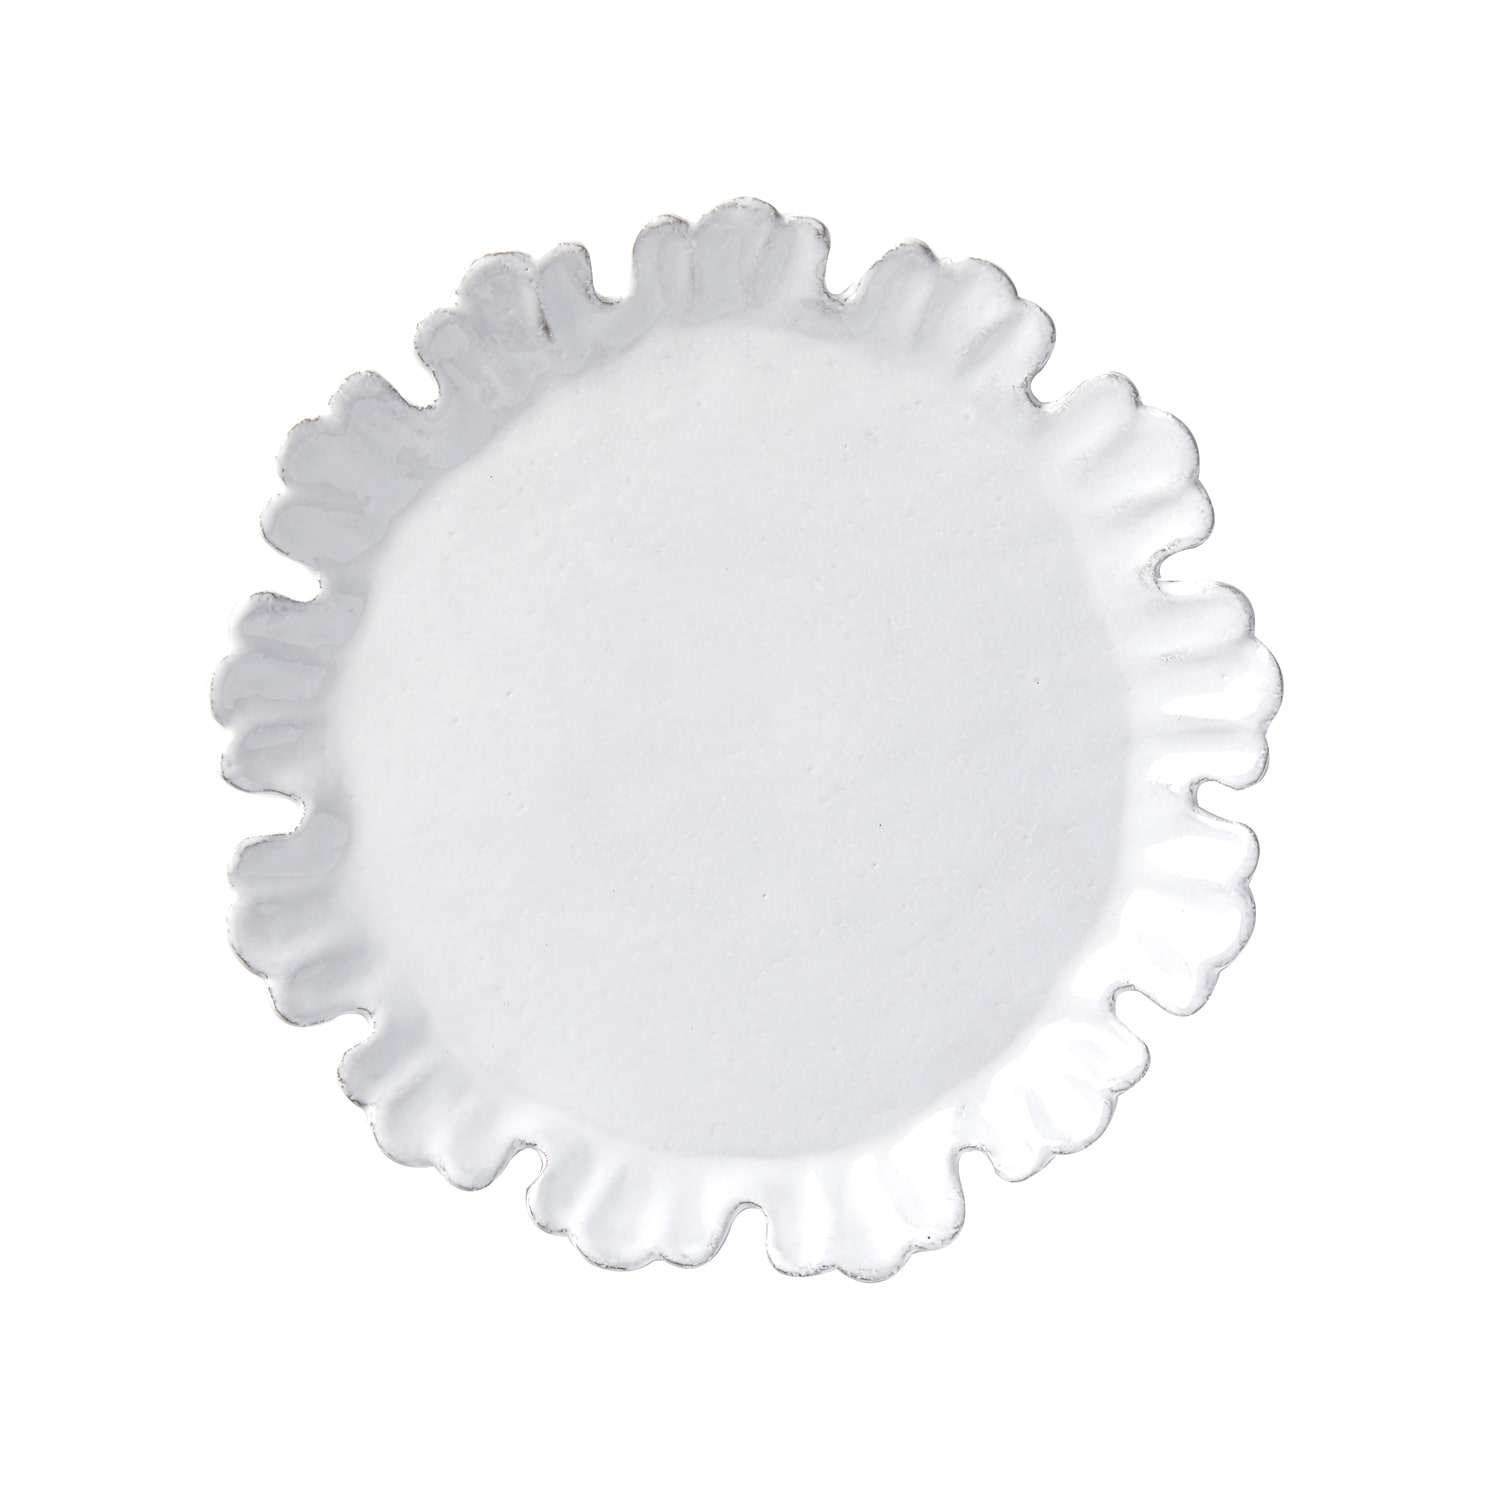 [Chou] Dinner Plate with 13 Petals